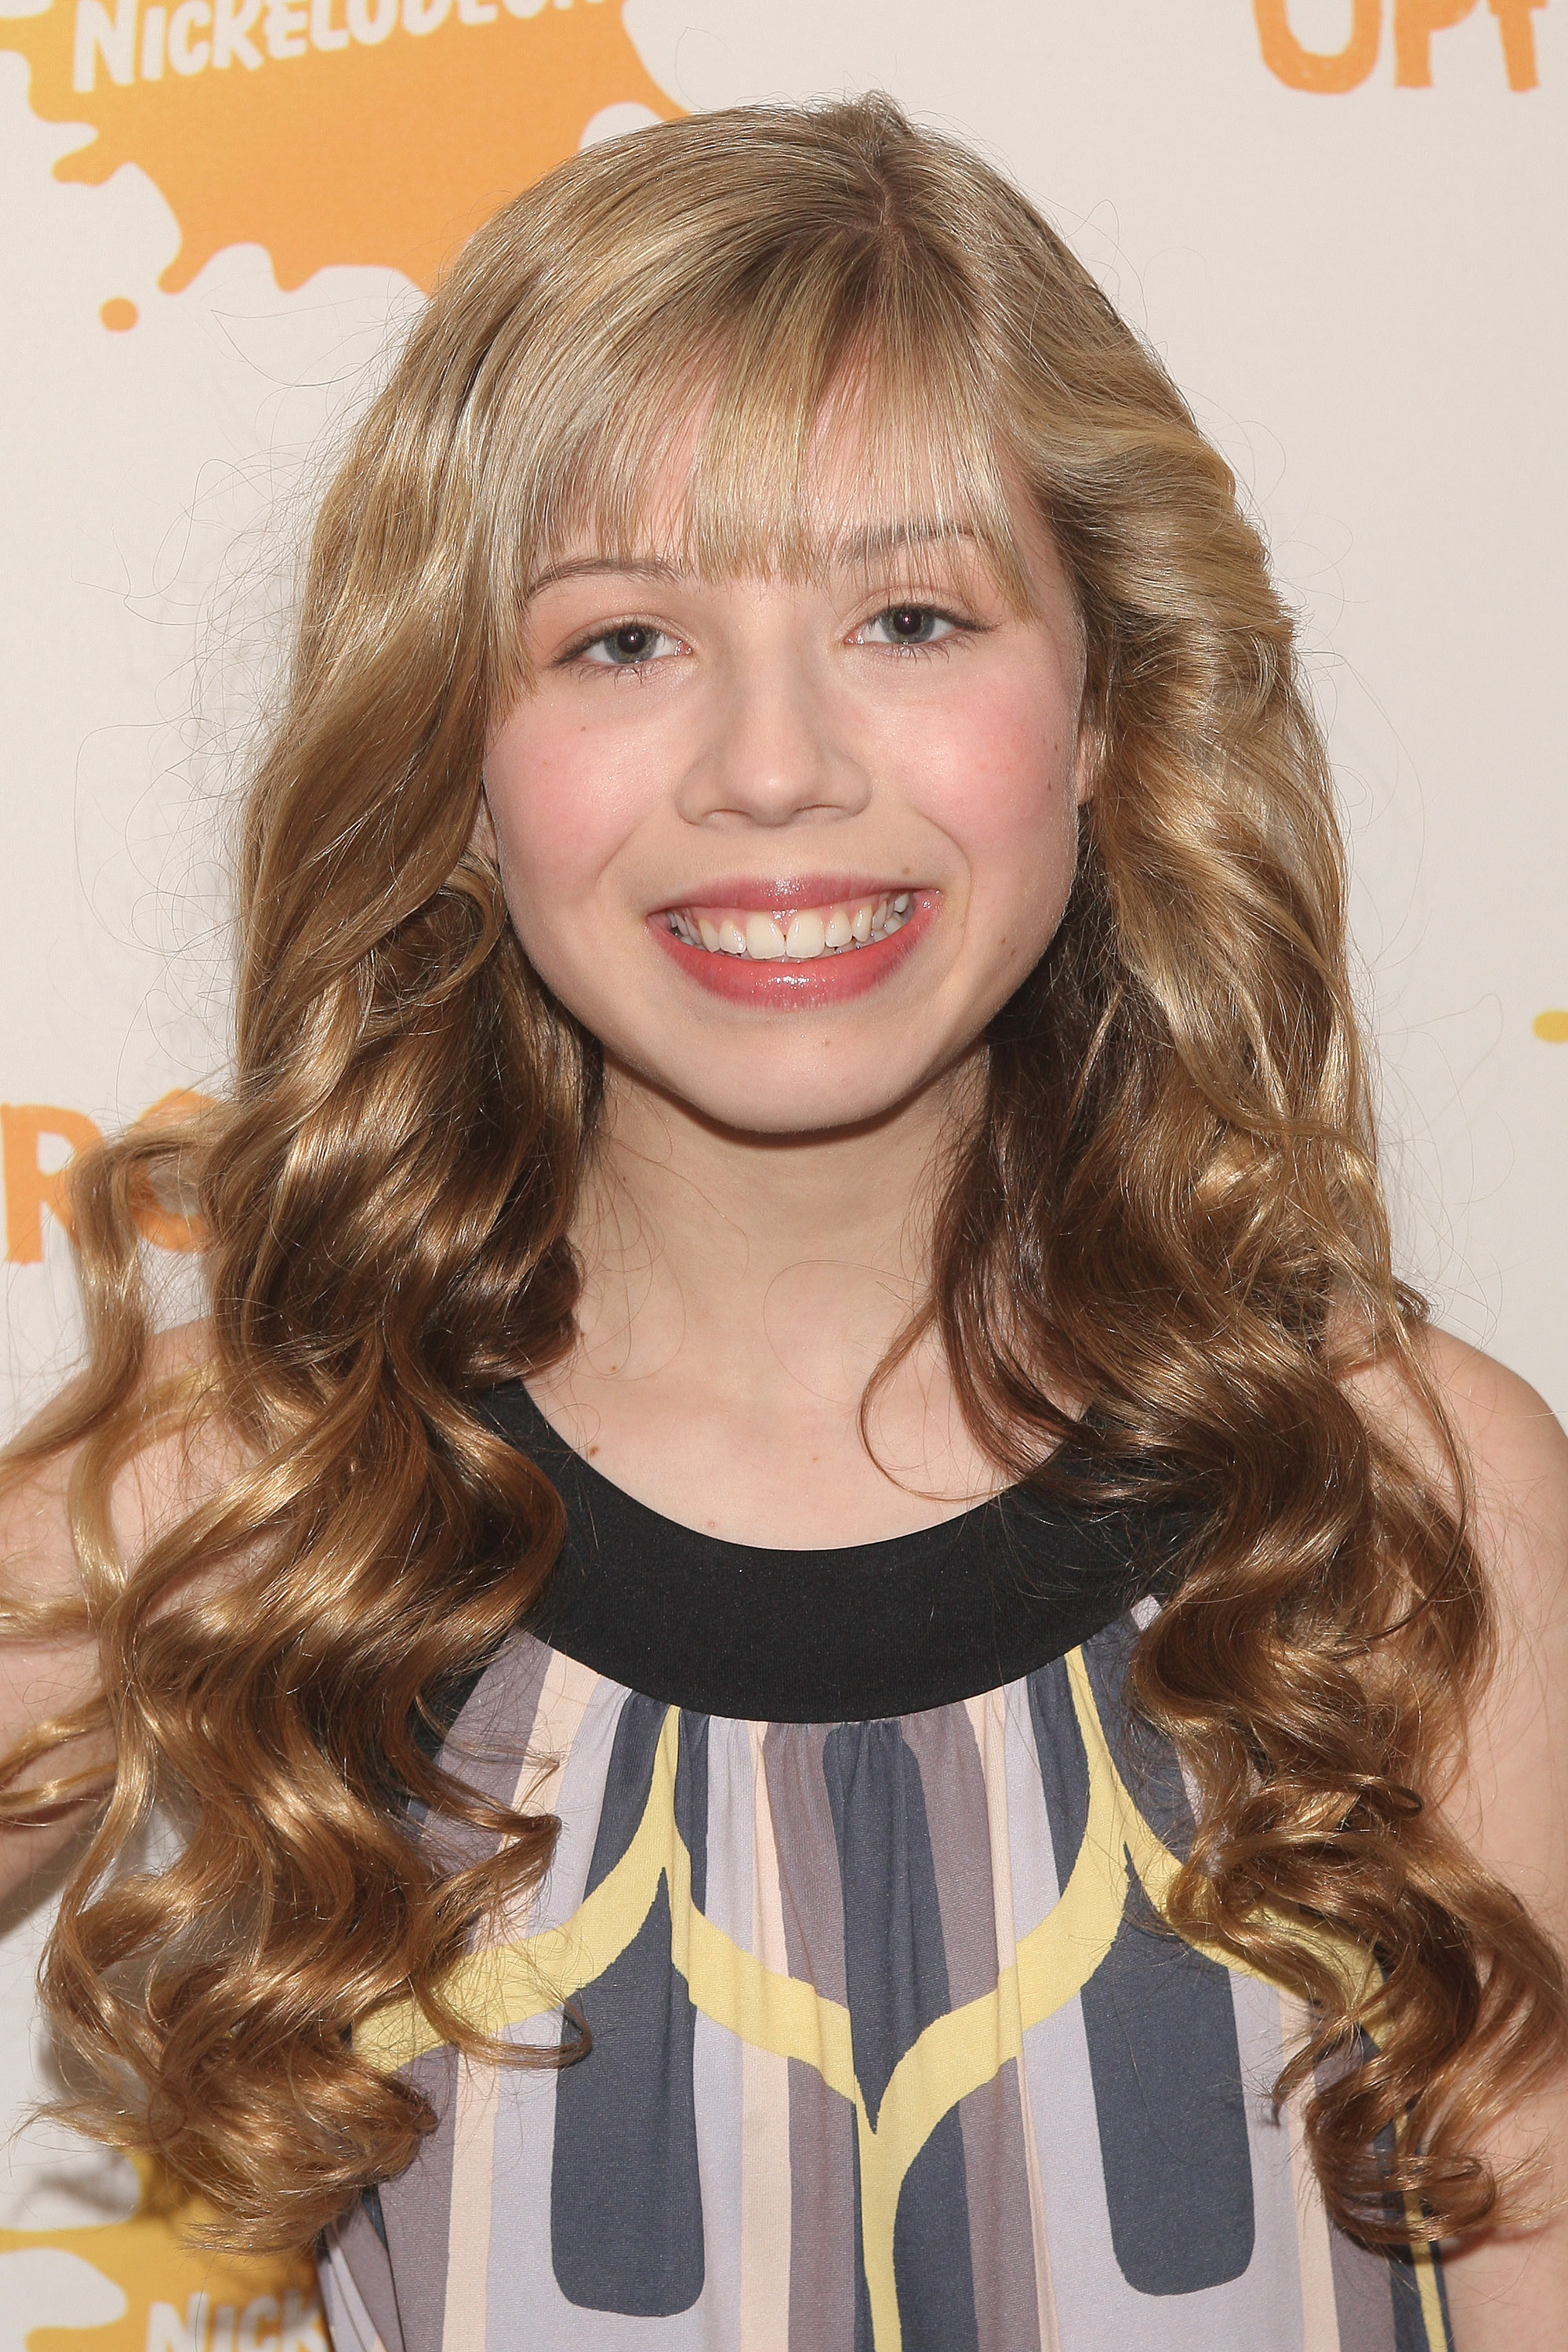 Jennette McCurdy attends the Nickelodeon 2008 upfront presentation on March 13, 2008 | Source: Getty Images